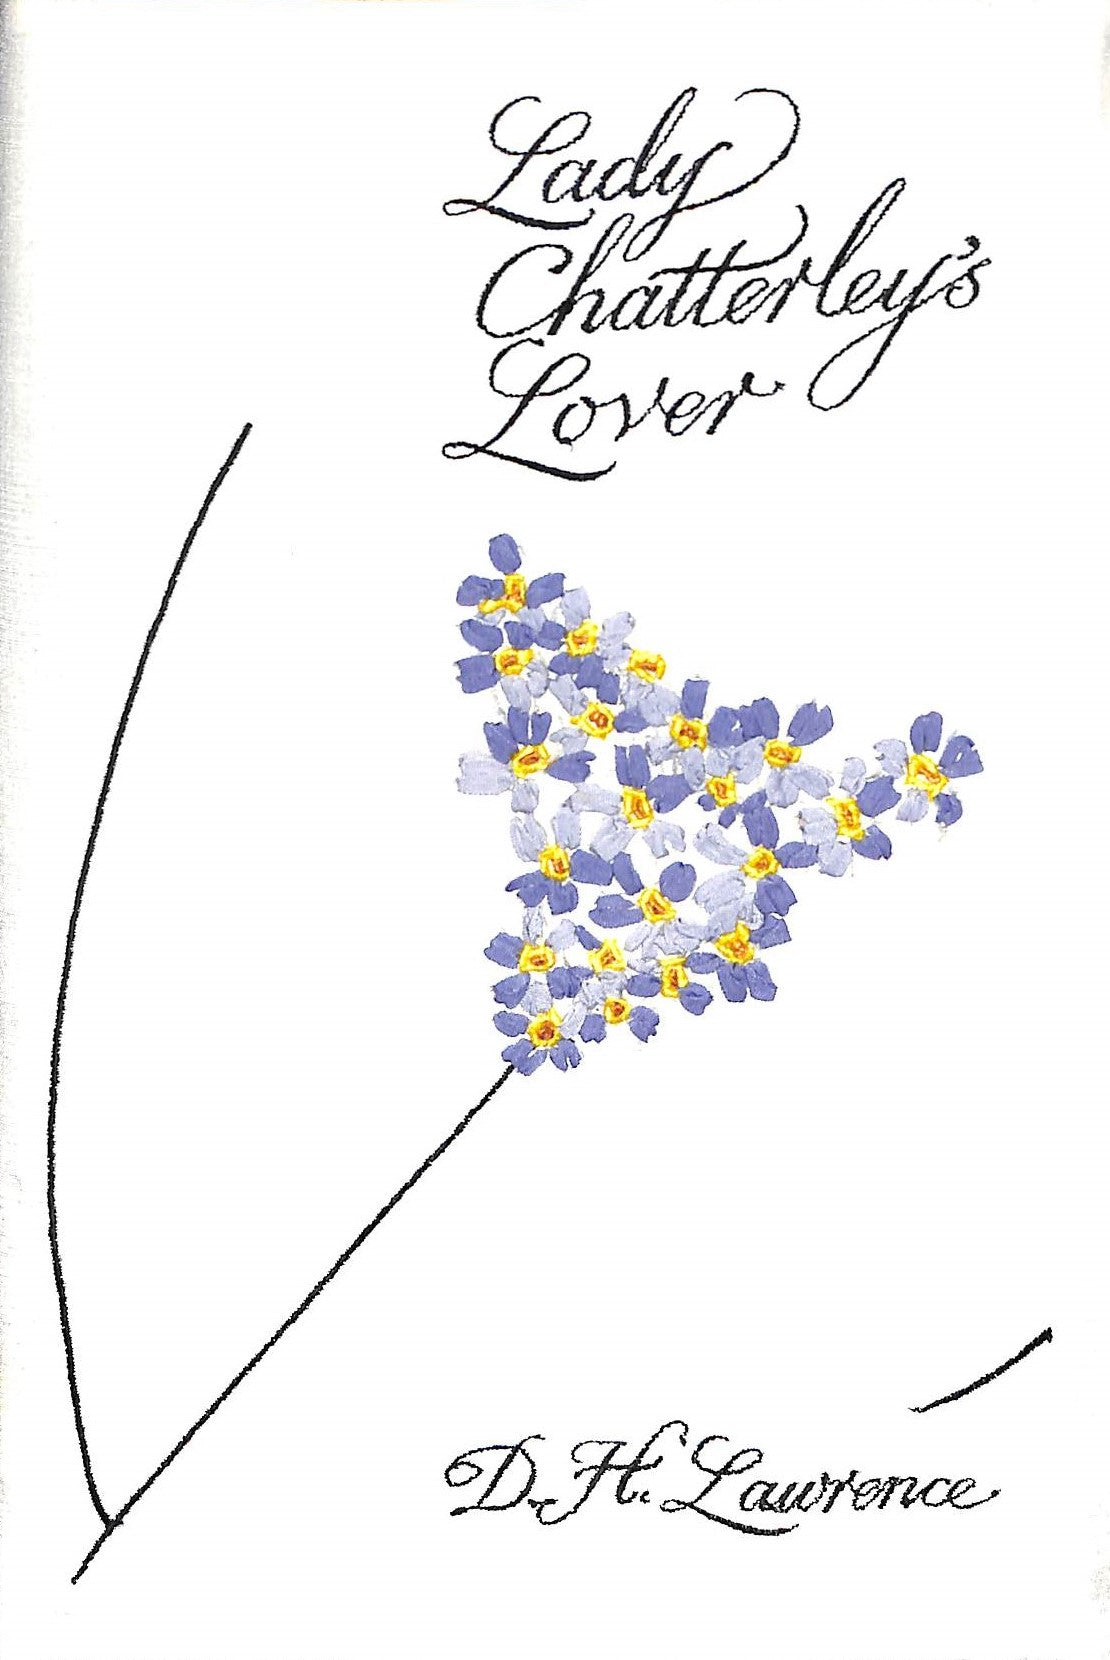 "Lady Chatterley's Lover" LAWRENCE, D.H.